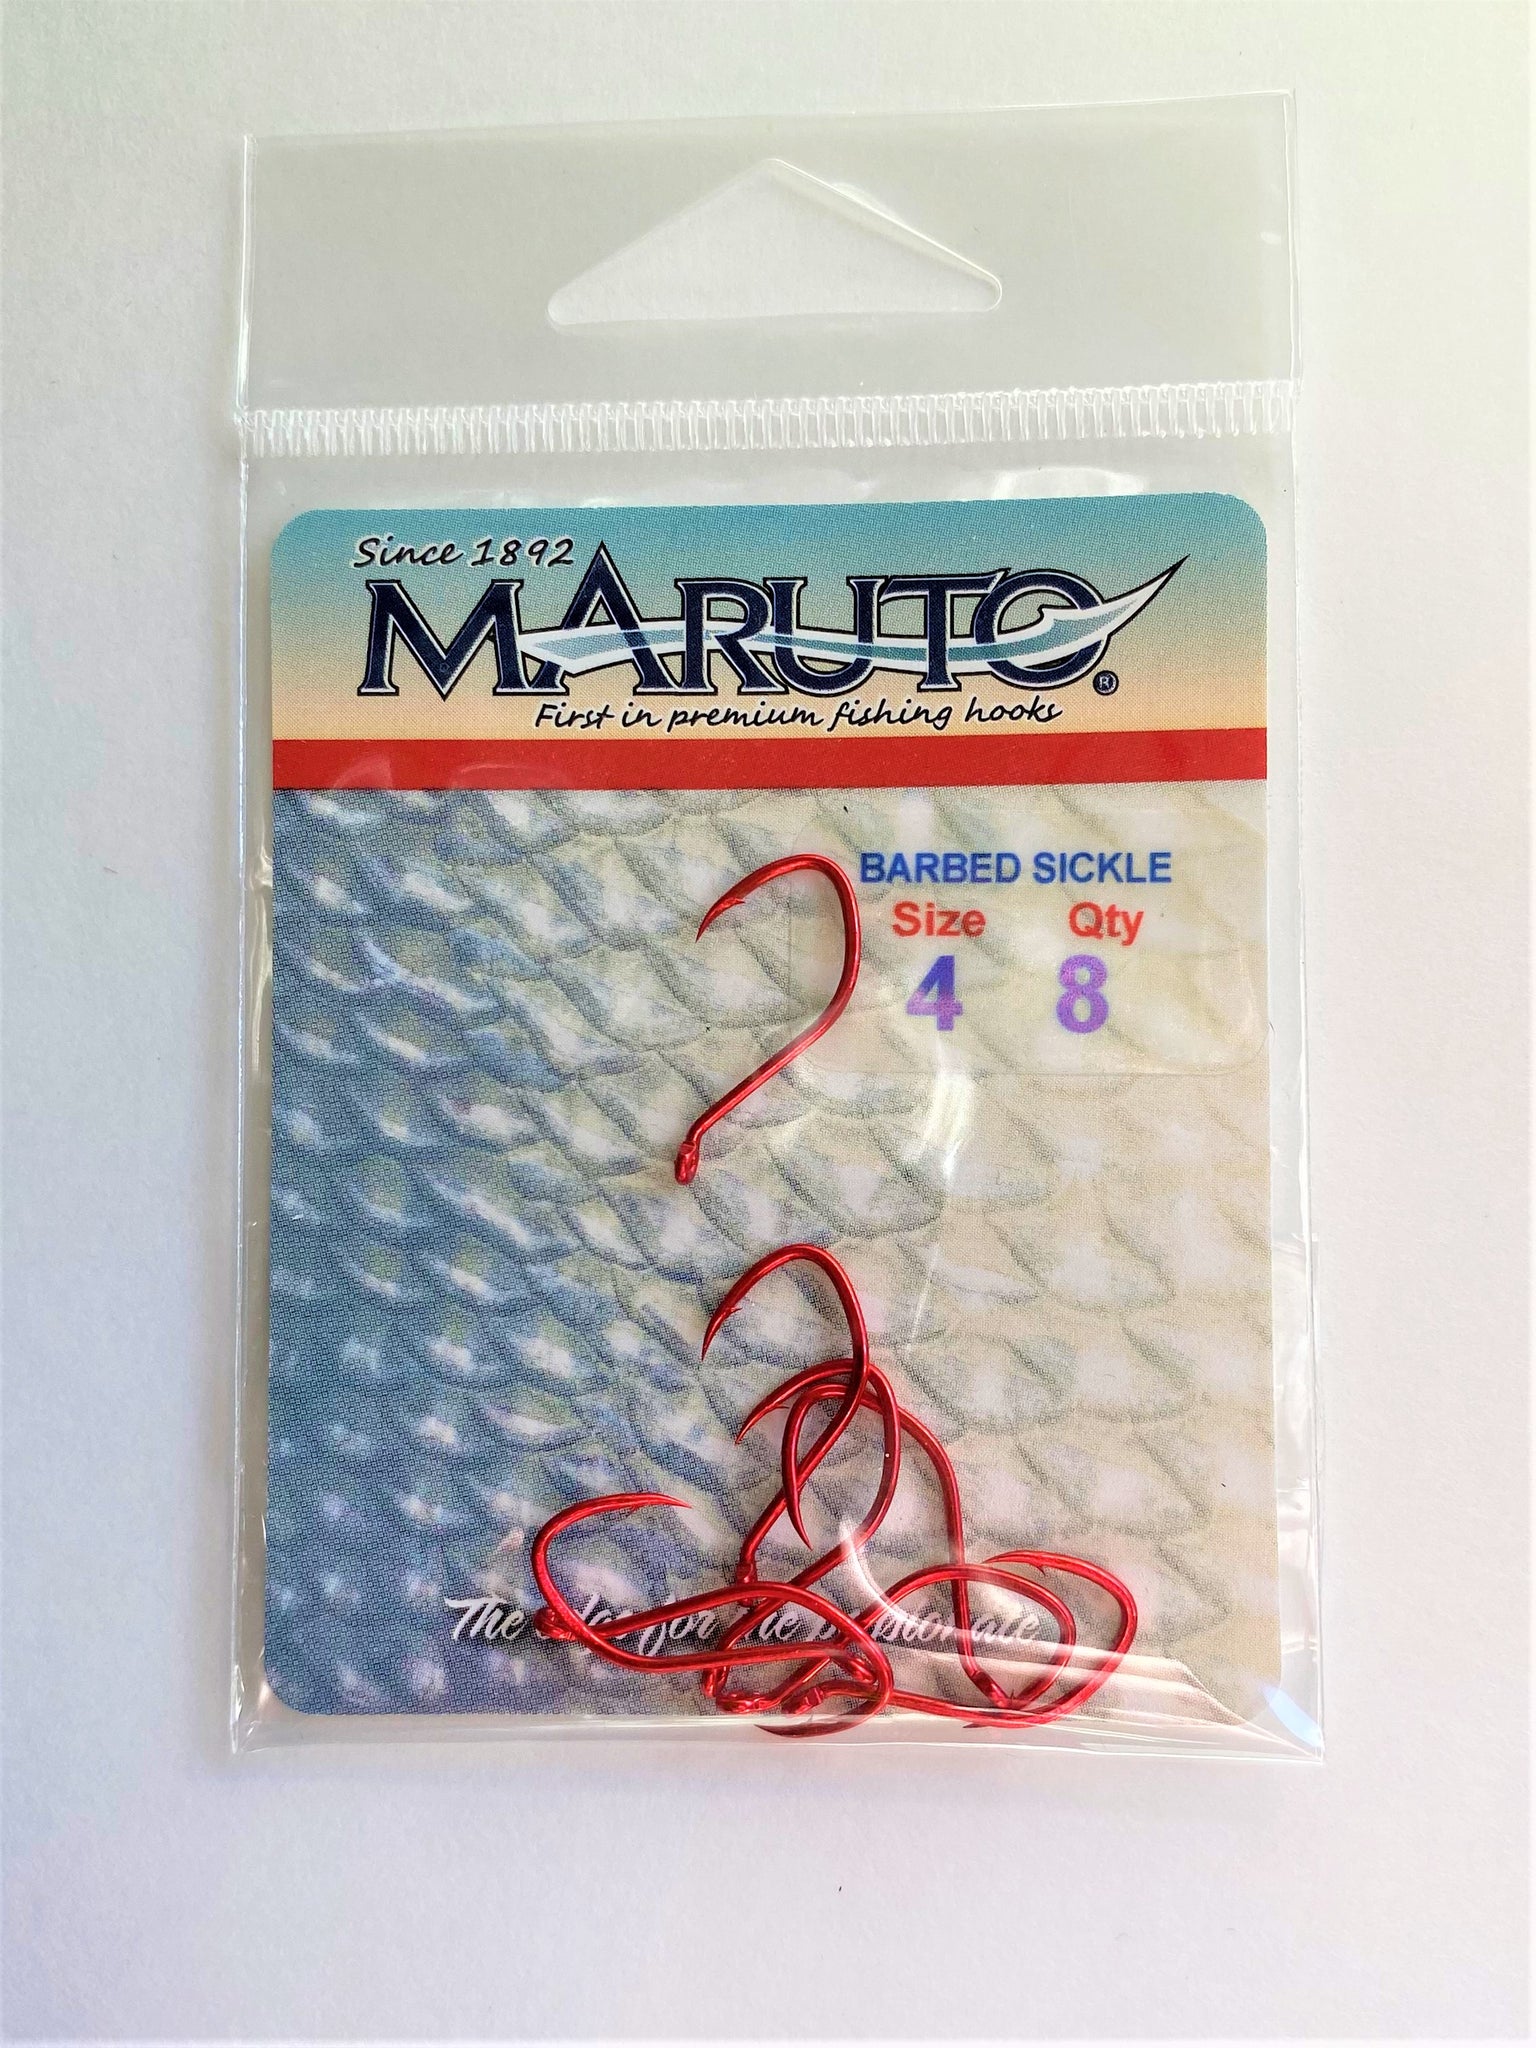 Red Barbed Sickle by Maruto Sz 4 8 Pack